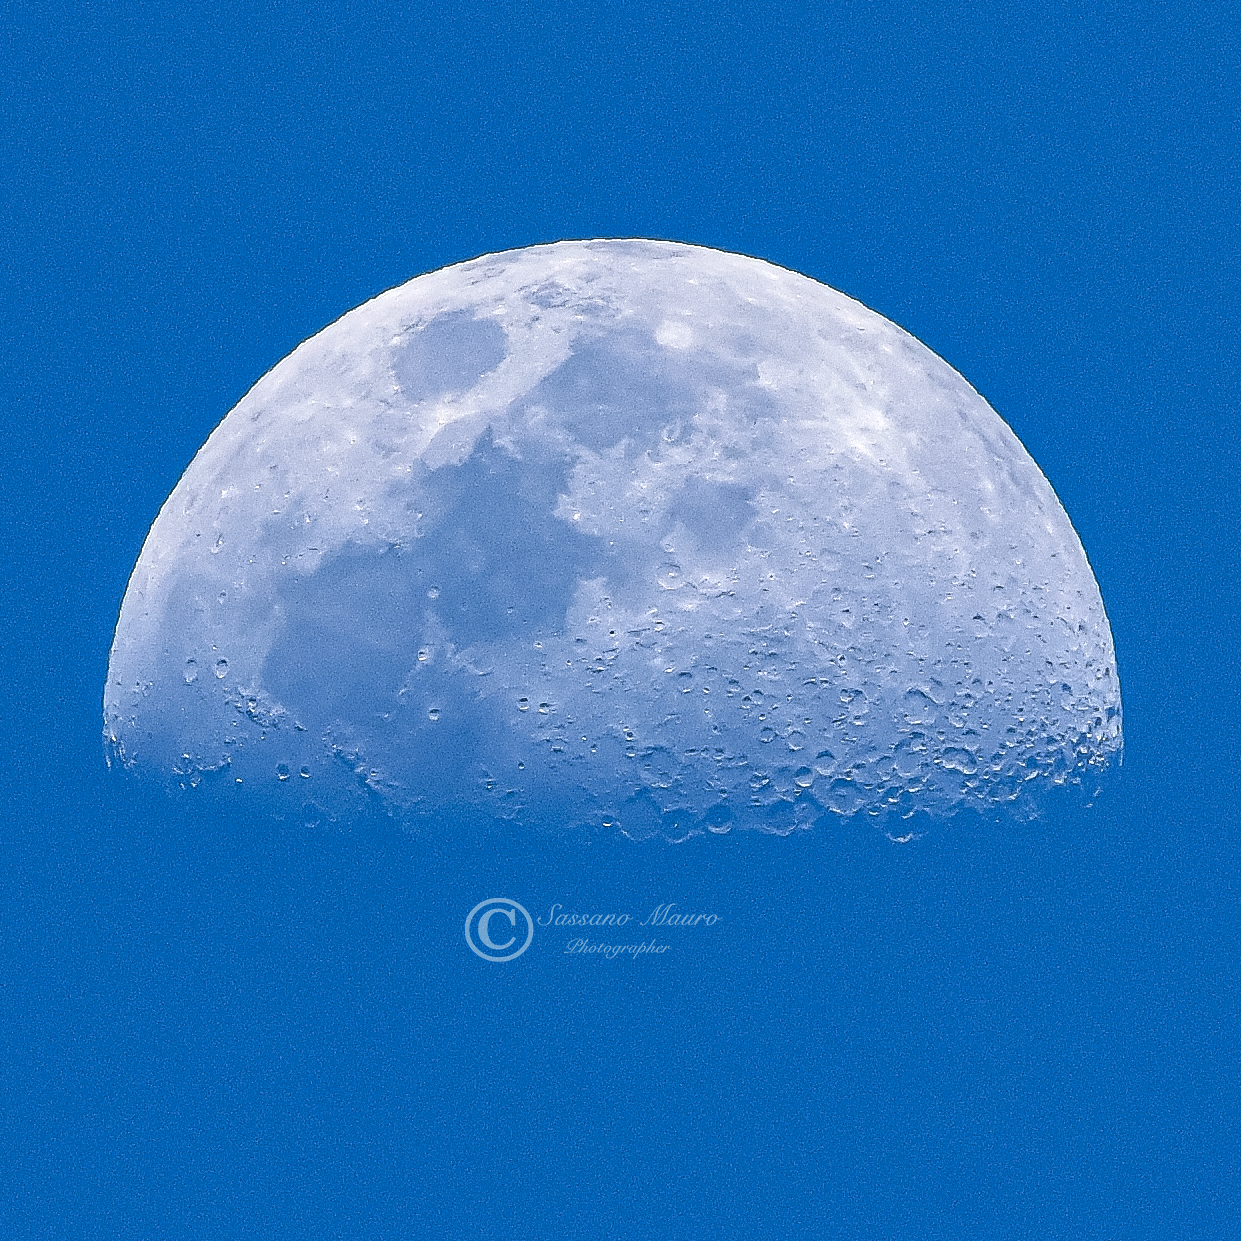 With such a clear sky, I couldn't help but photograph it. ...